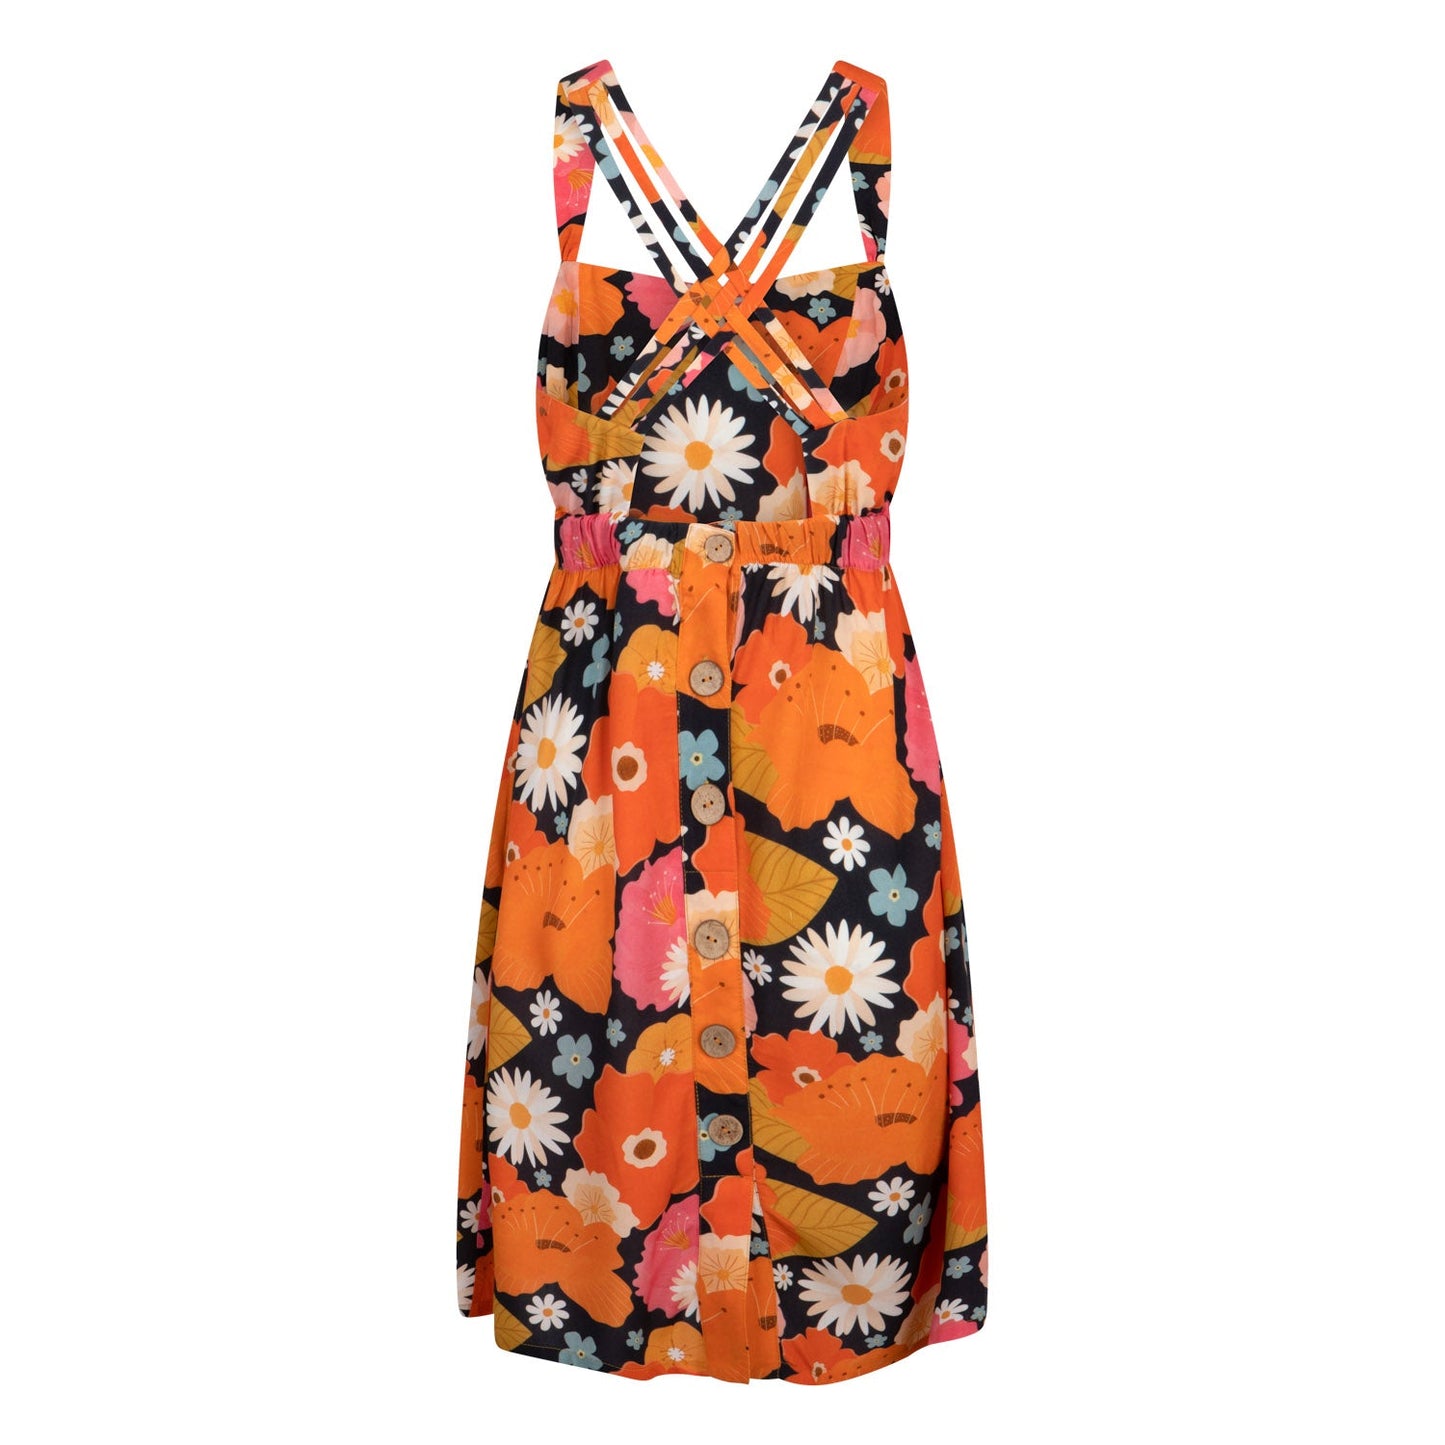 Dress Sweet Sixties "Picnic with flowers"